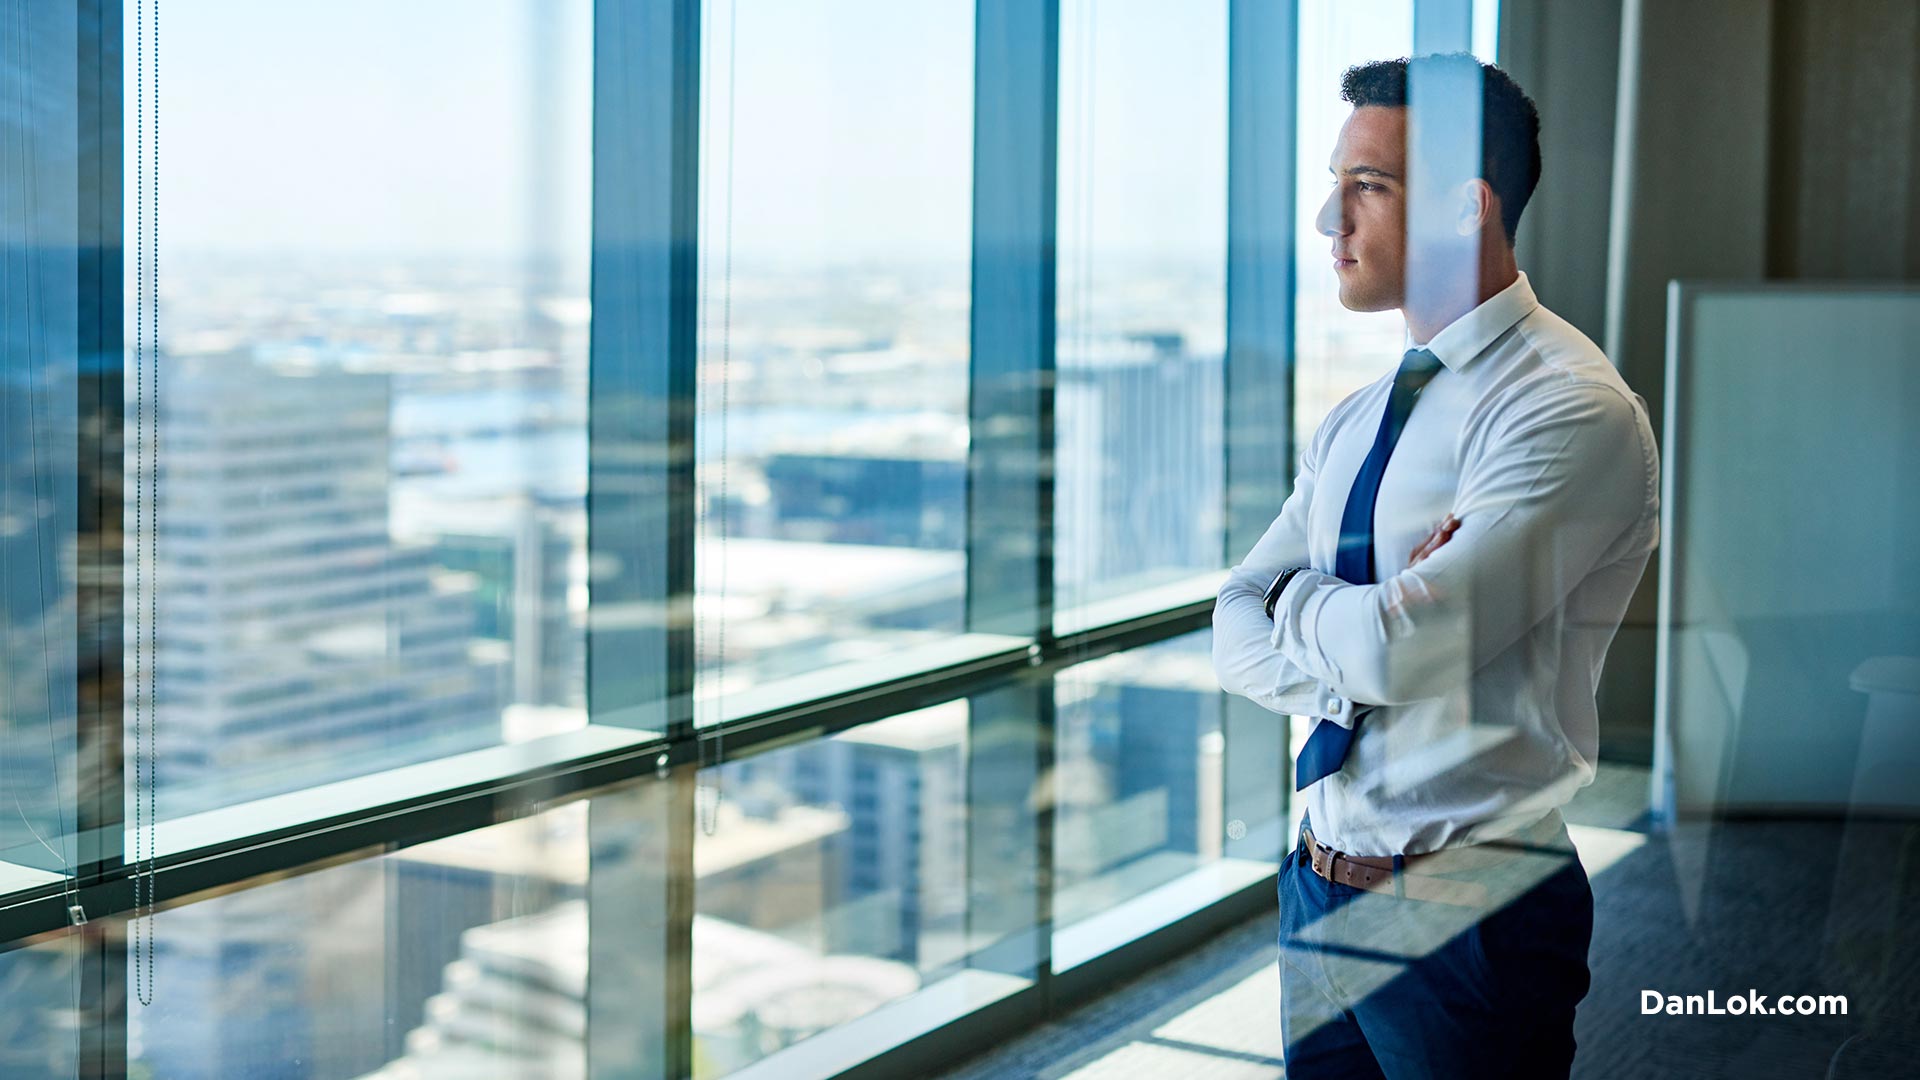 Man evaluating business opportunities staring out the window and thinking